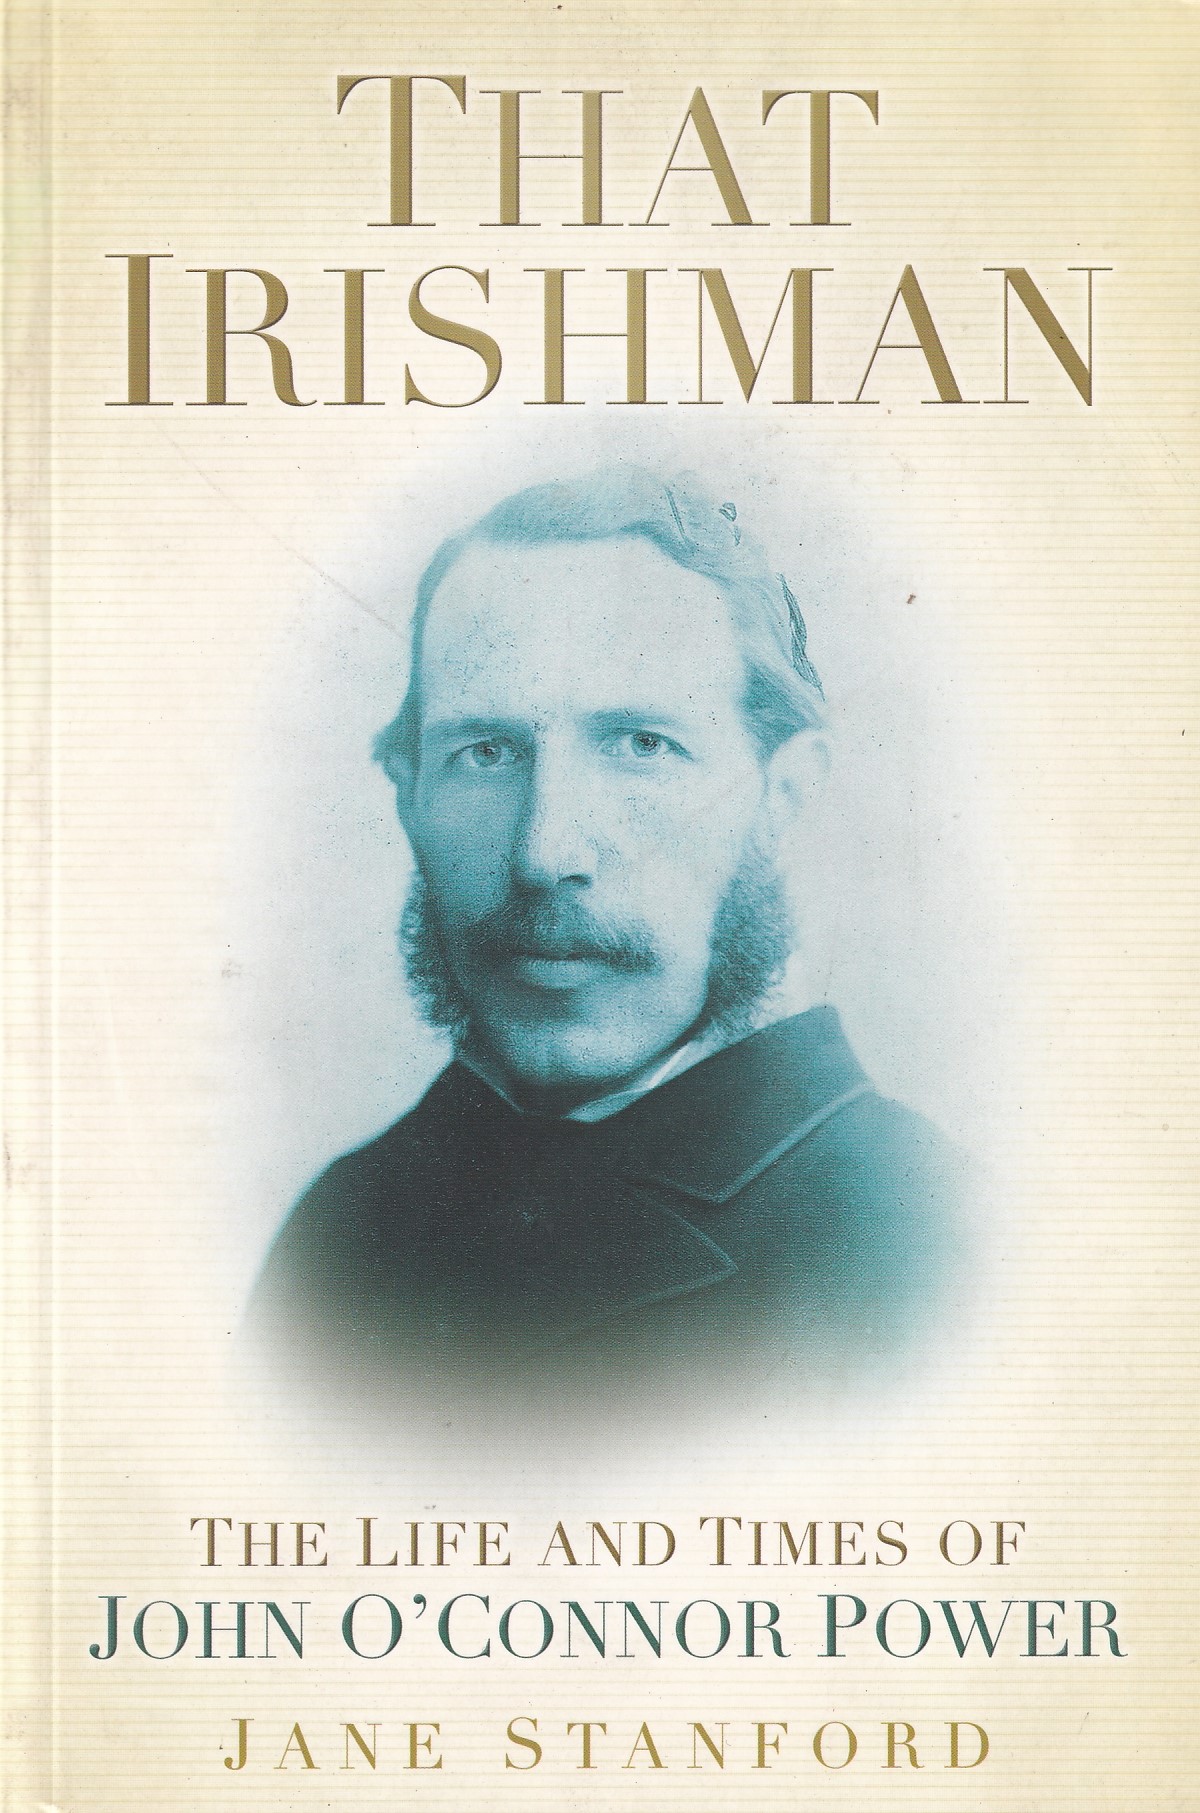 That Irishman: The Life and Times of John O’Connor Power by Jane Stanford